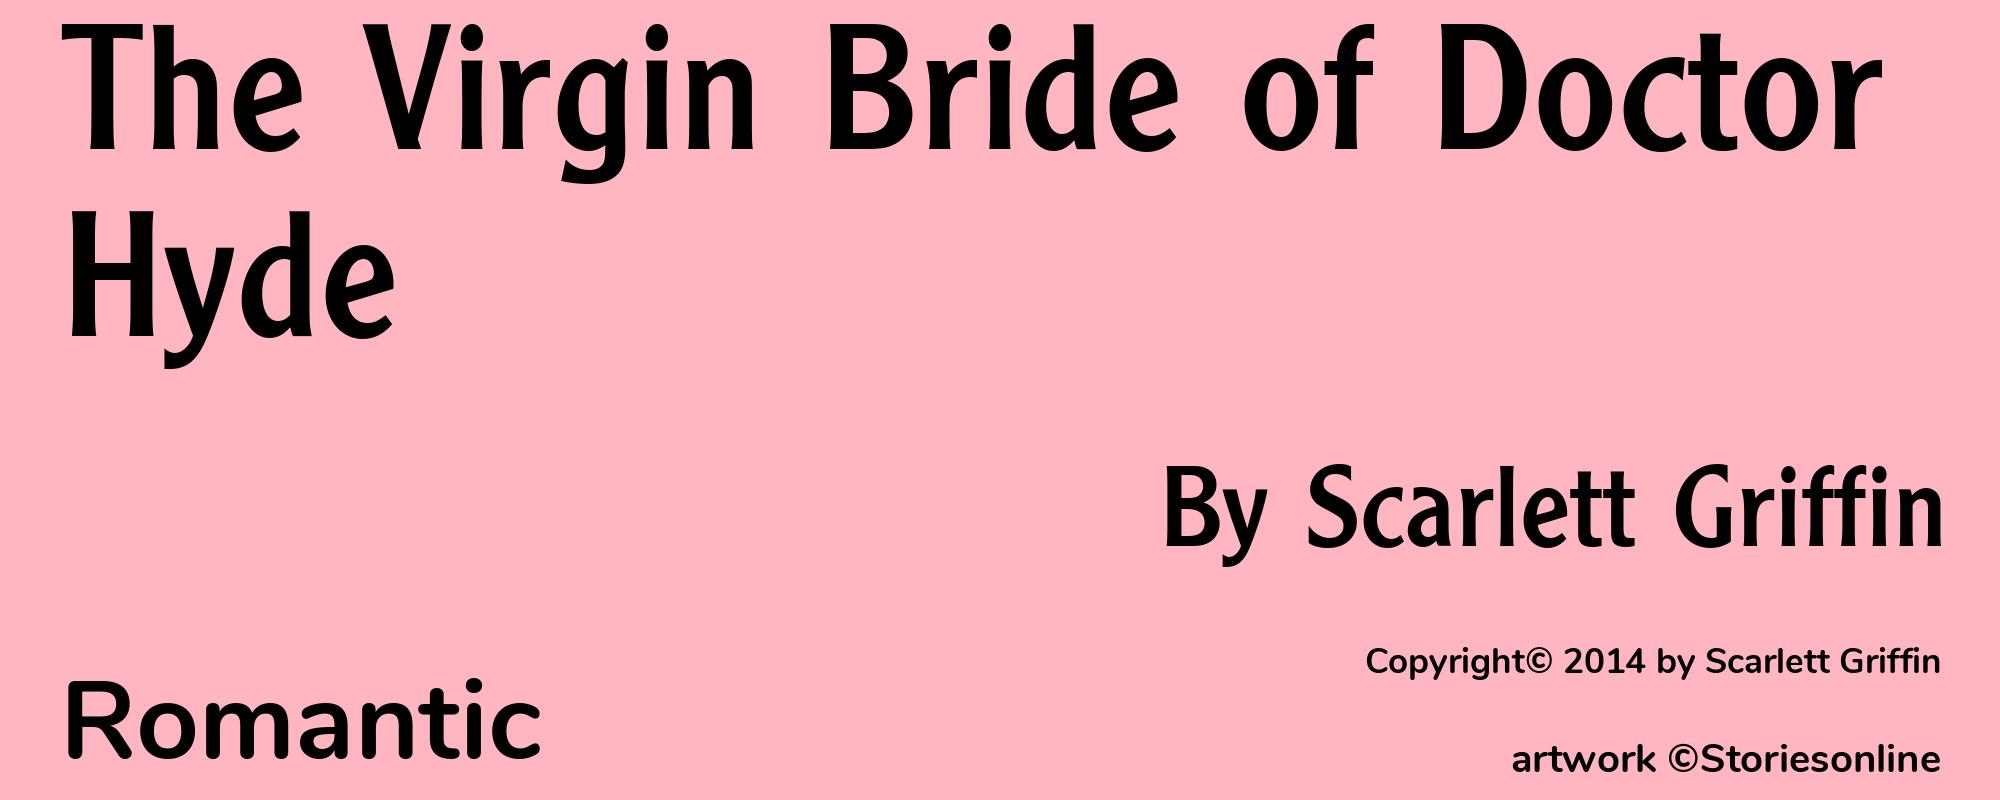 The Virgin Bride of Doctor Hyde - Cover